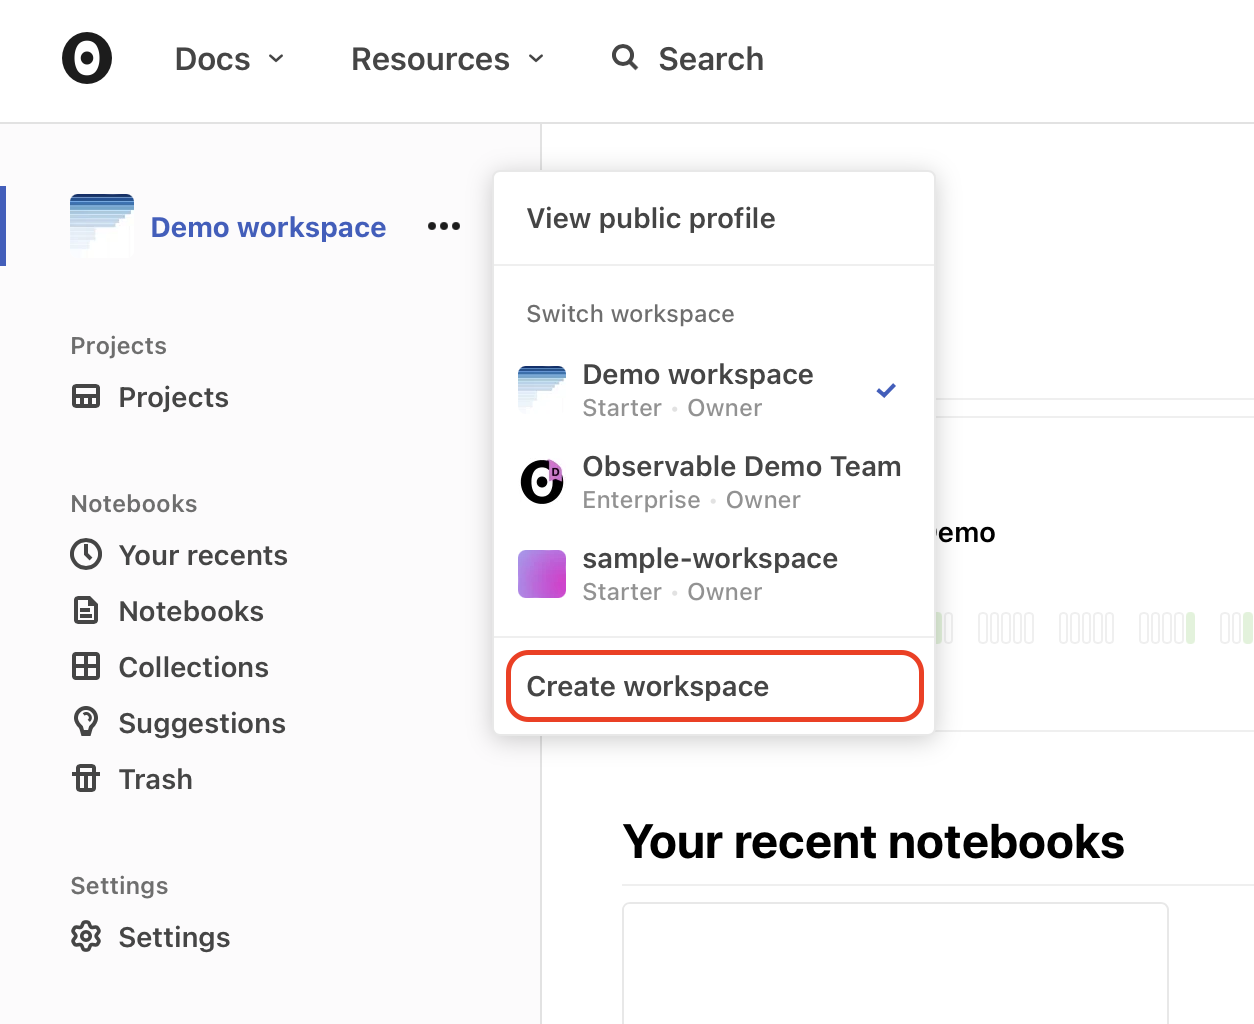 Screenshot of the workspaces drop-down in the top left